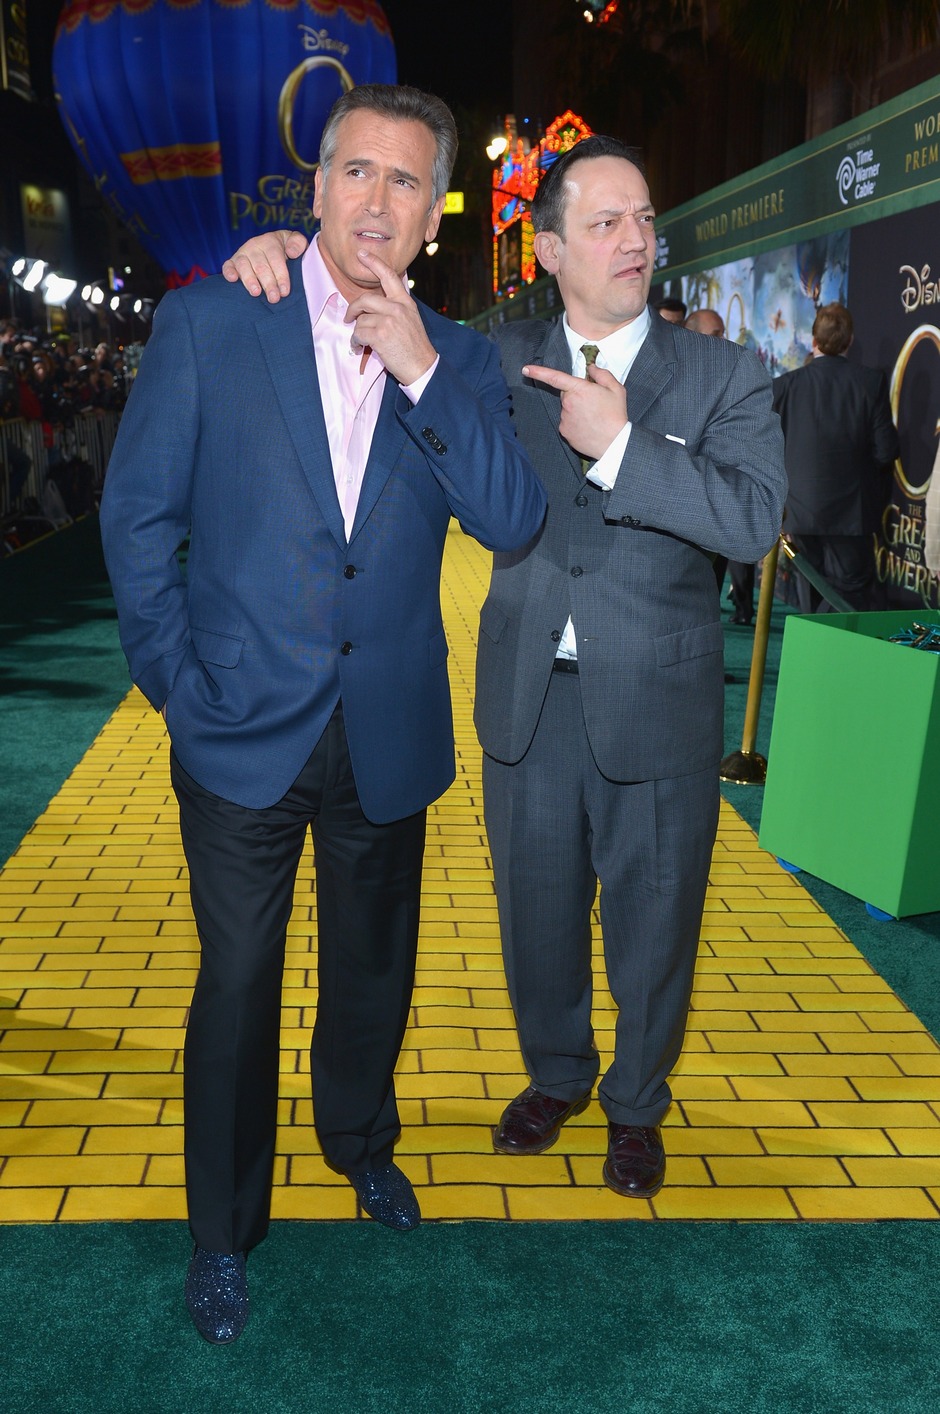 Bruce Campbell and Ted Raimi at OZ: The Great and Powerful premiere.